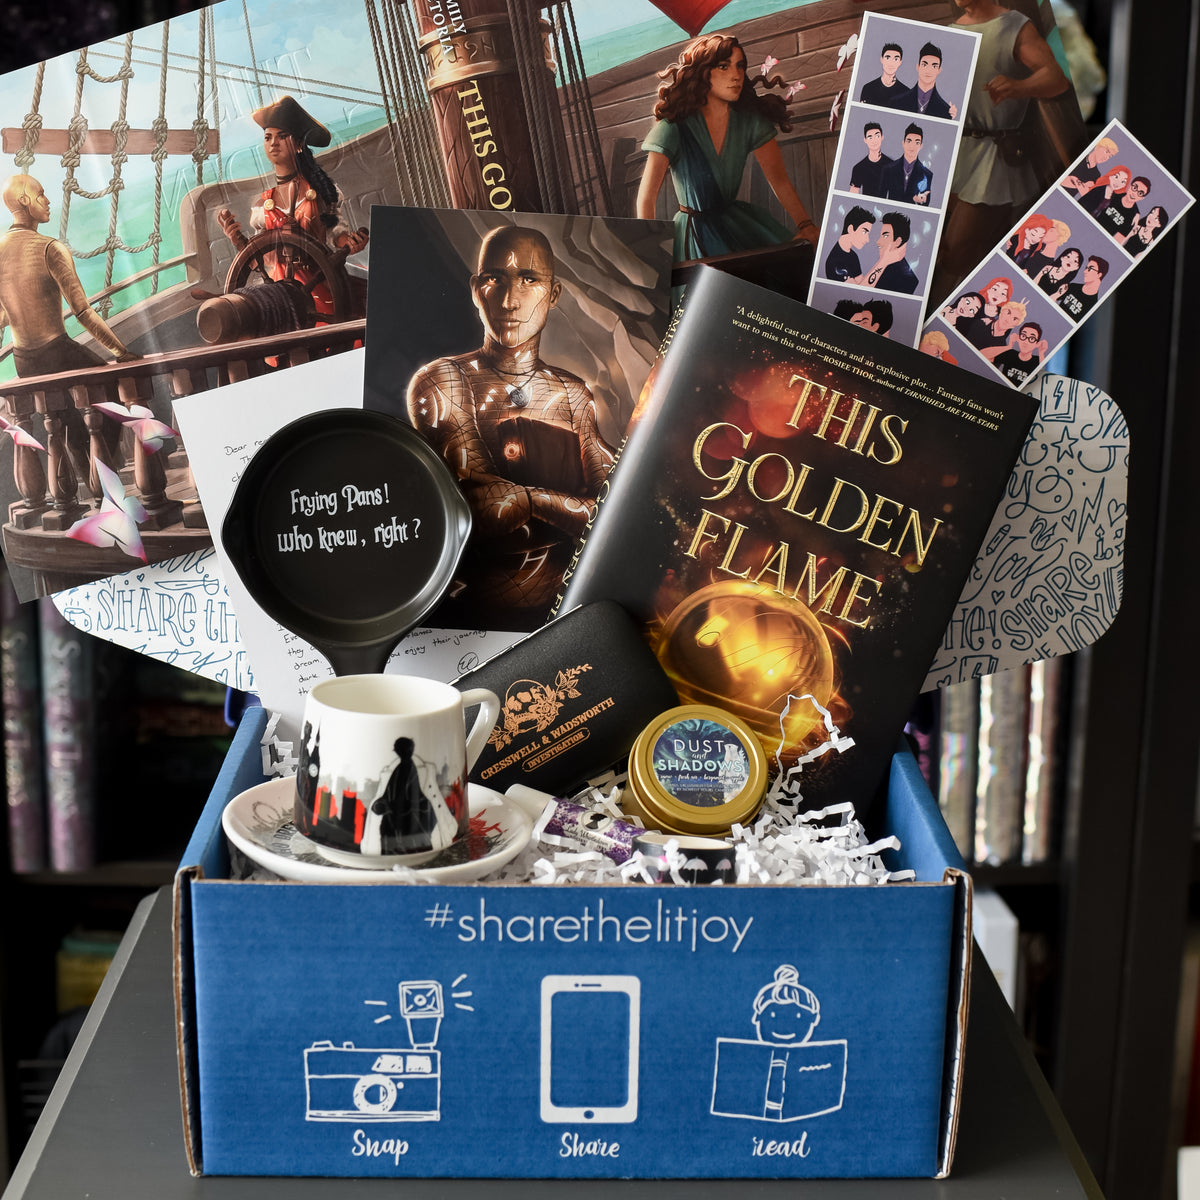 Journey To Belong Crate comes with The Golden Flame book, a small frying pan, a teacup and saucer, candle and more!